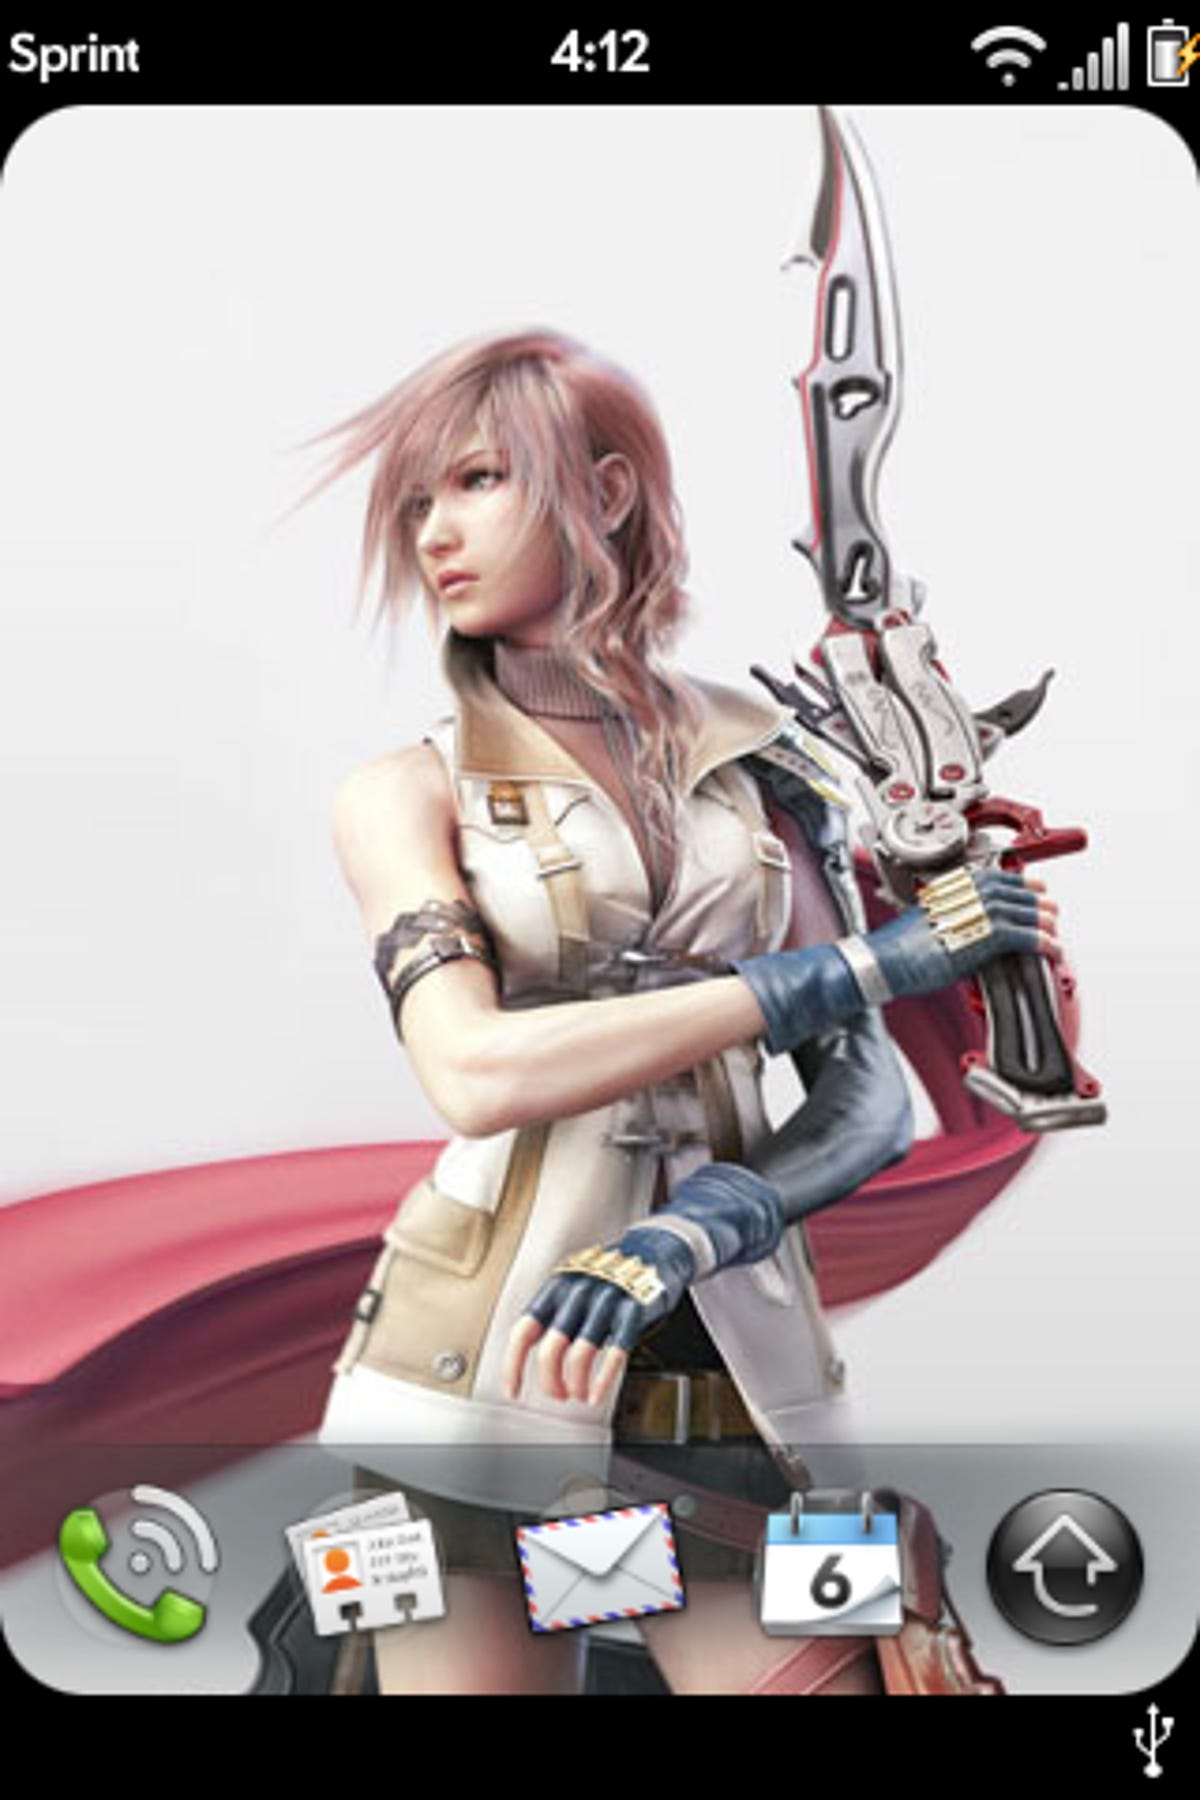 Lighting from Final Fantasy XIII is my wallpaper